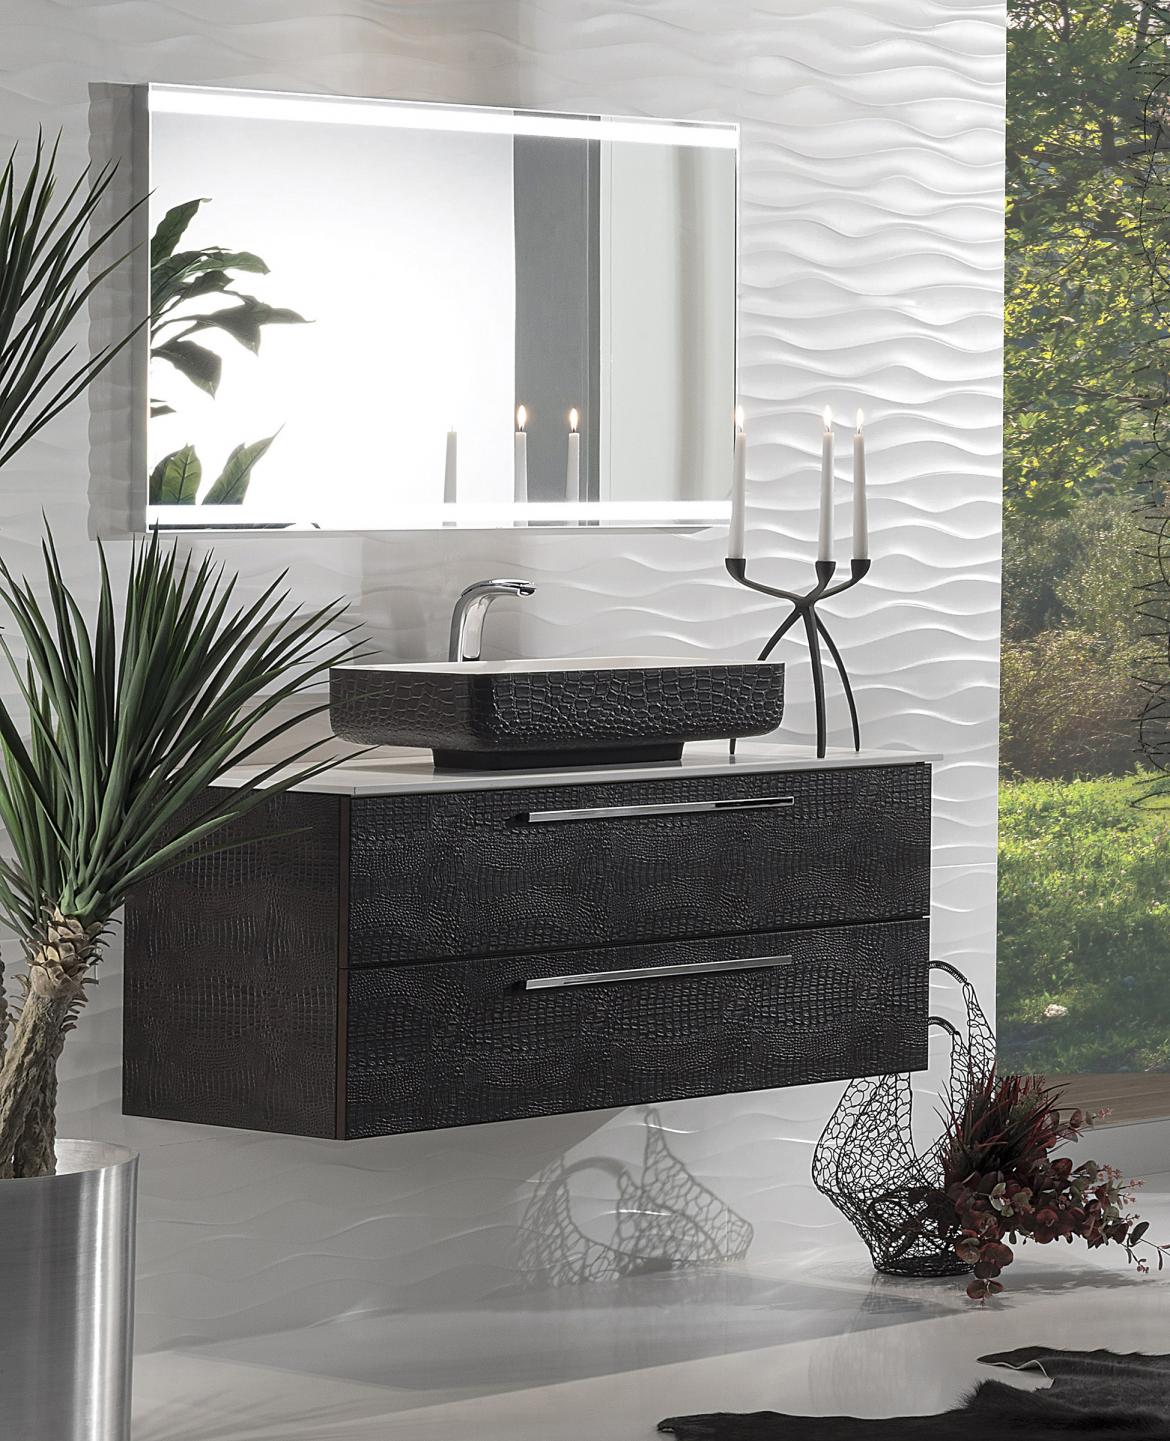 Topex Design has updated its recently introduced Armadi Art Acqua Collection with a new option that includes faux crocodile leather surfacing for the vanities and sinks.